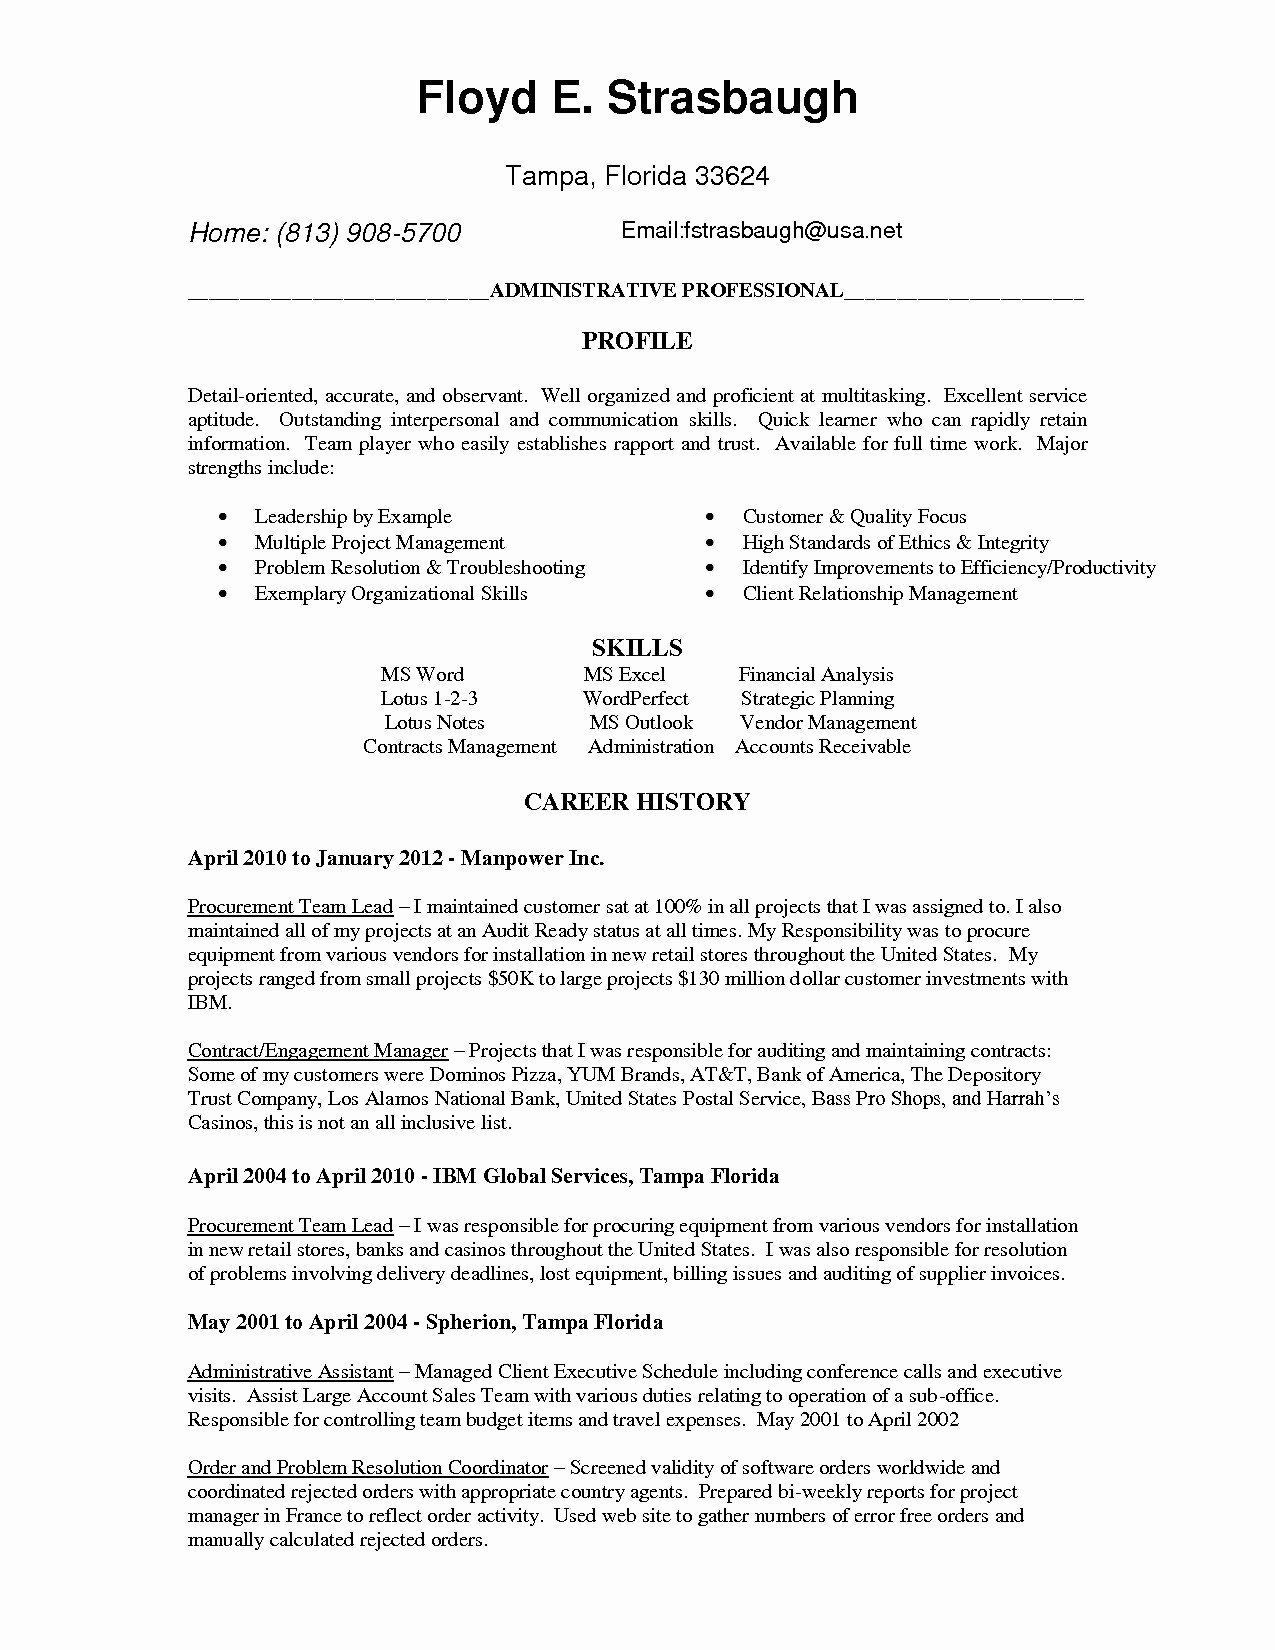 business cover letter template microsoft word Collection-Free Microsoft Word Resume Templates Awesome Professional Job Resume Template Od Specialist Cover Letter Lead Staggering Business Ppt Templates Free 16-n